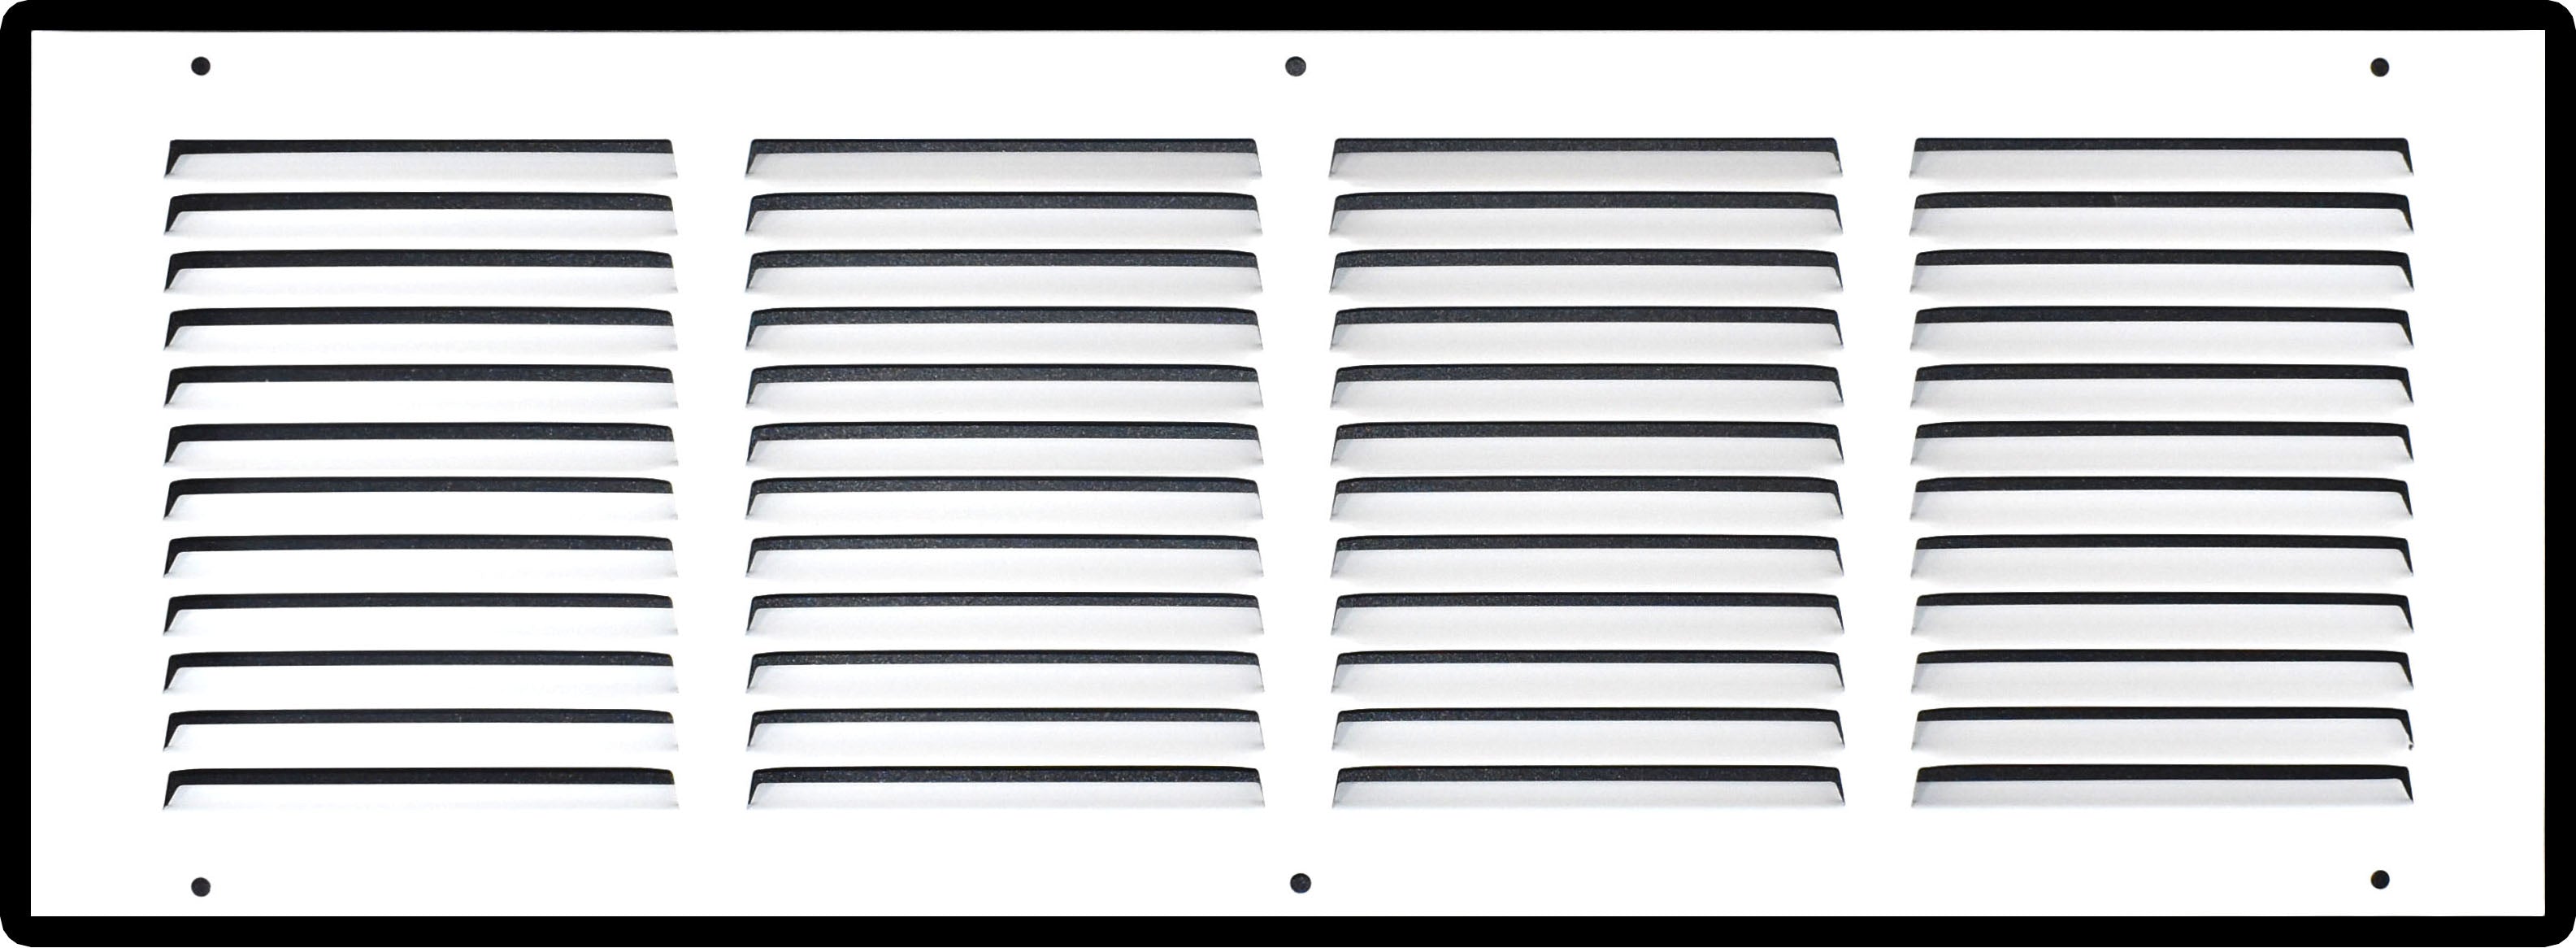 20" X 6" Duct Opening | Steel Return Air Grille for Sidewall and Ceiling | Outer Dimensions: 21.75"W X 7.75"H